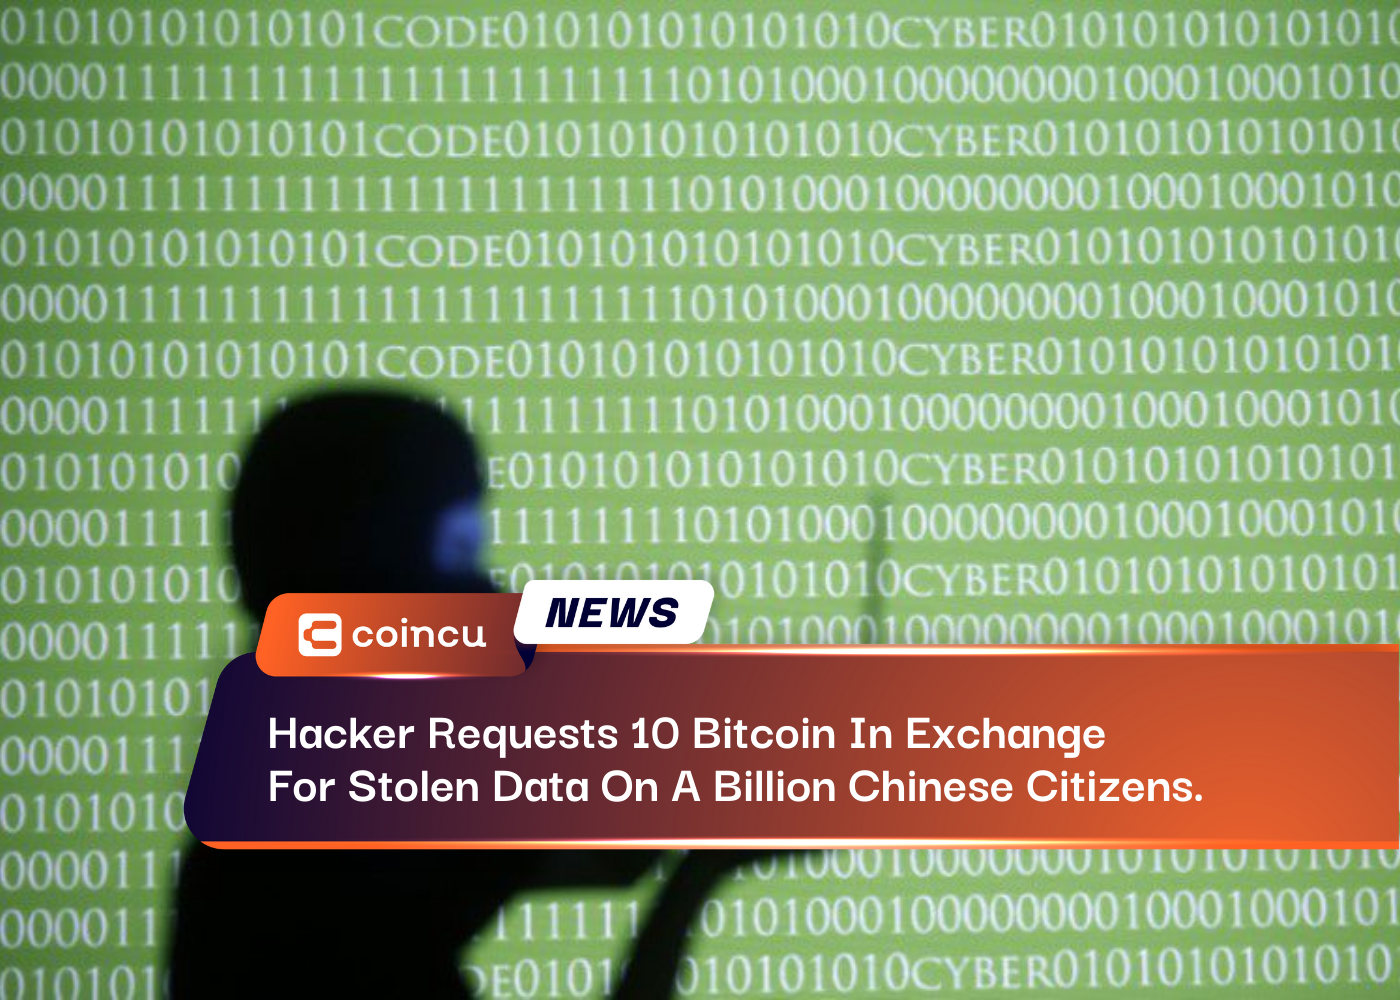 Hacker Requests 10 Bitcoin In Exchange For Stolen Data On A Billion Chinese Citizens.